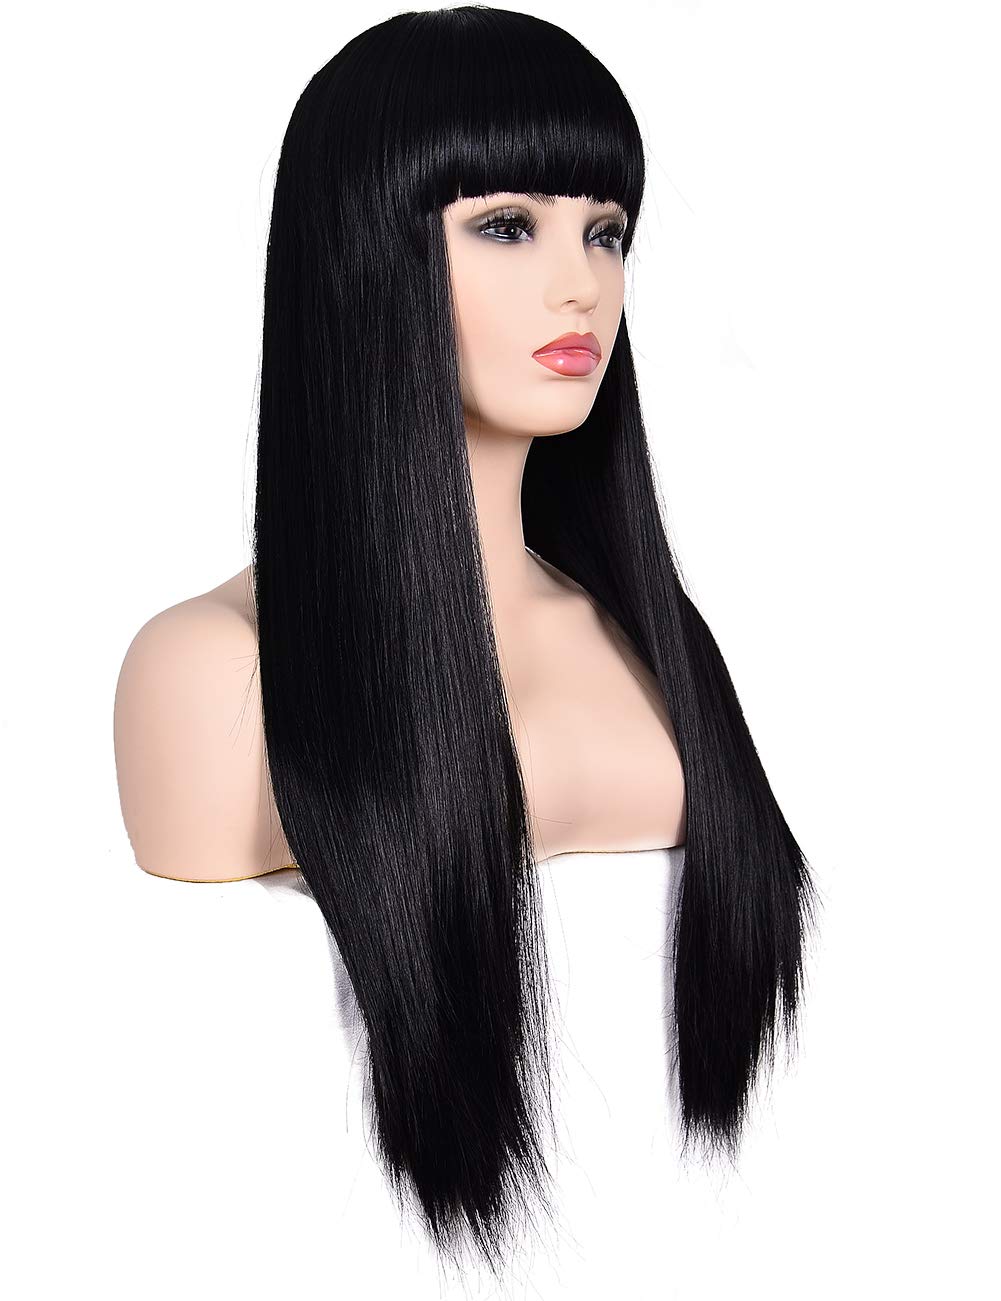 Lush Locks Synthetic Hair Natural Looking Long Black Straight Wigs for women and girls